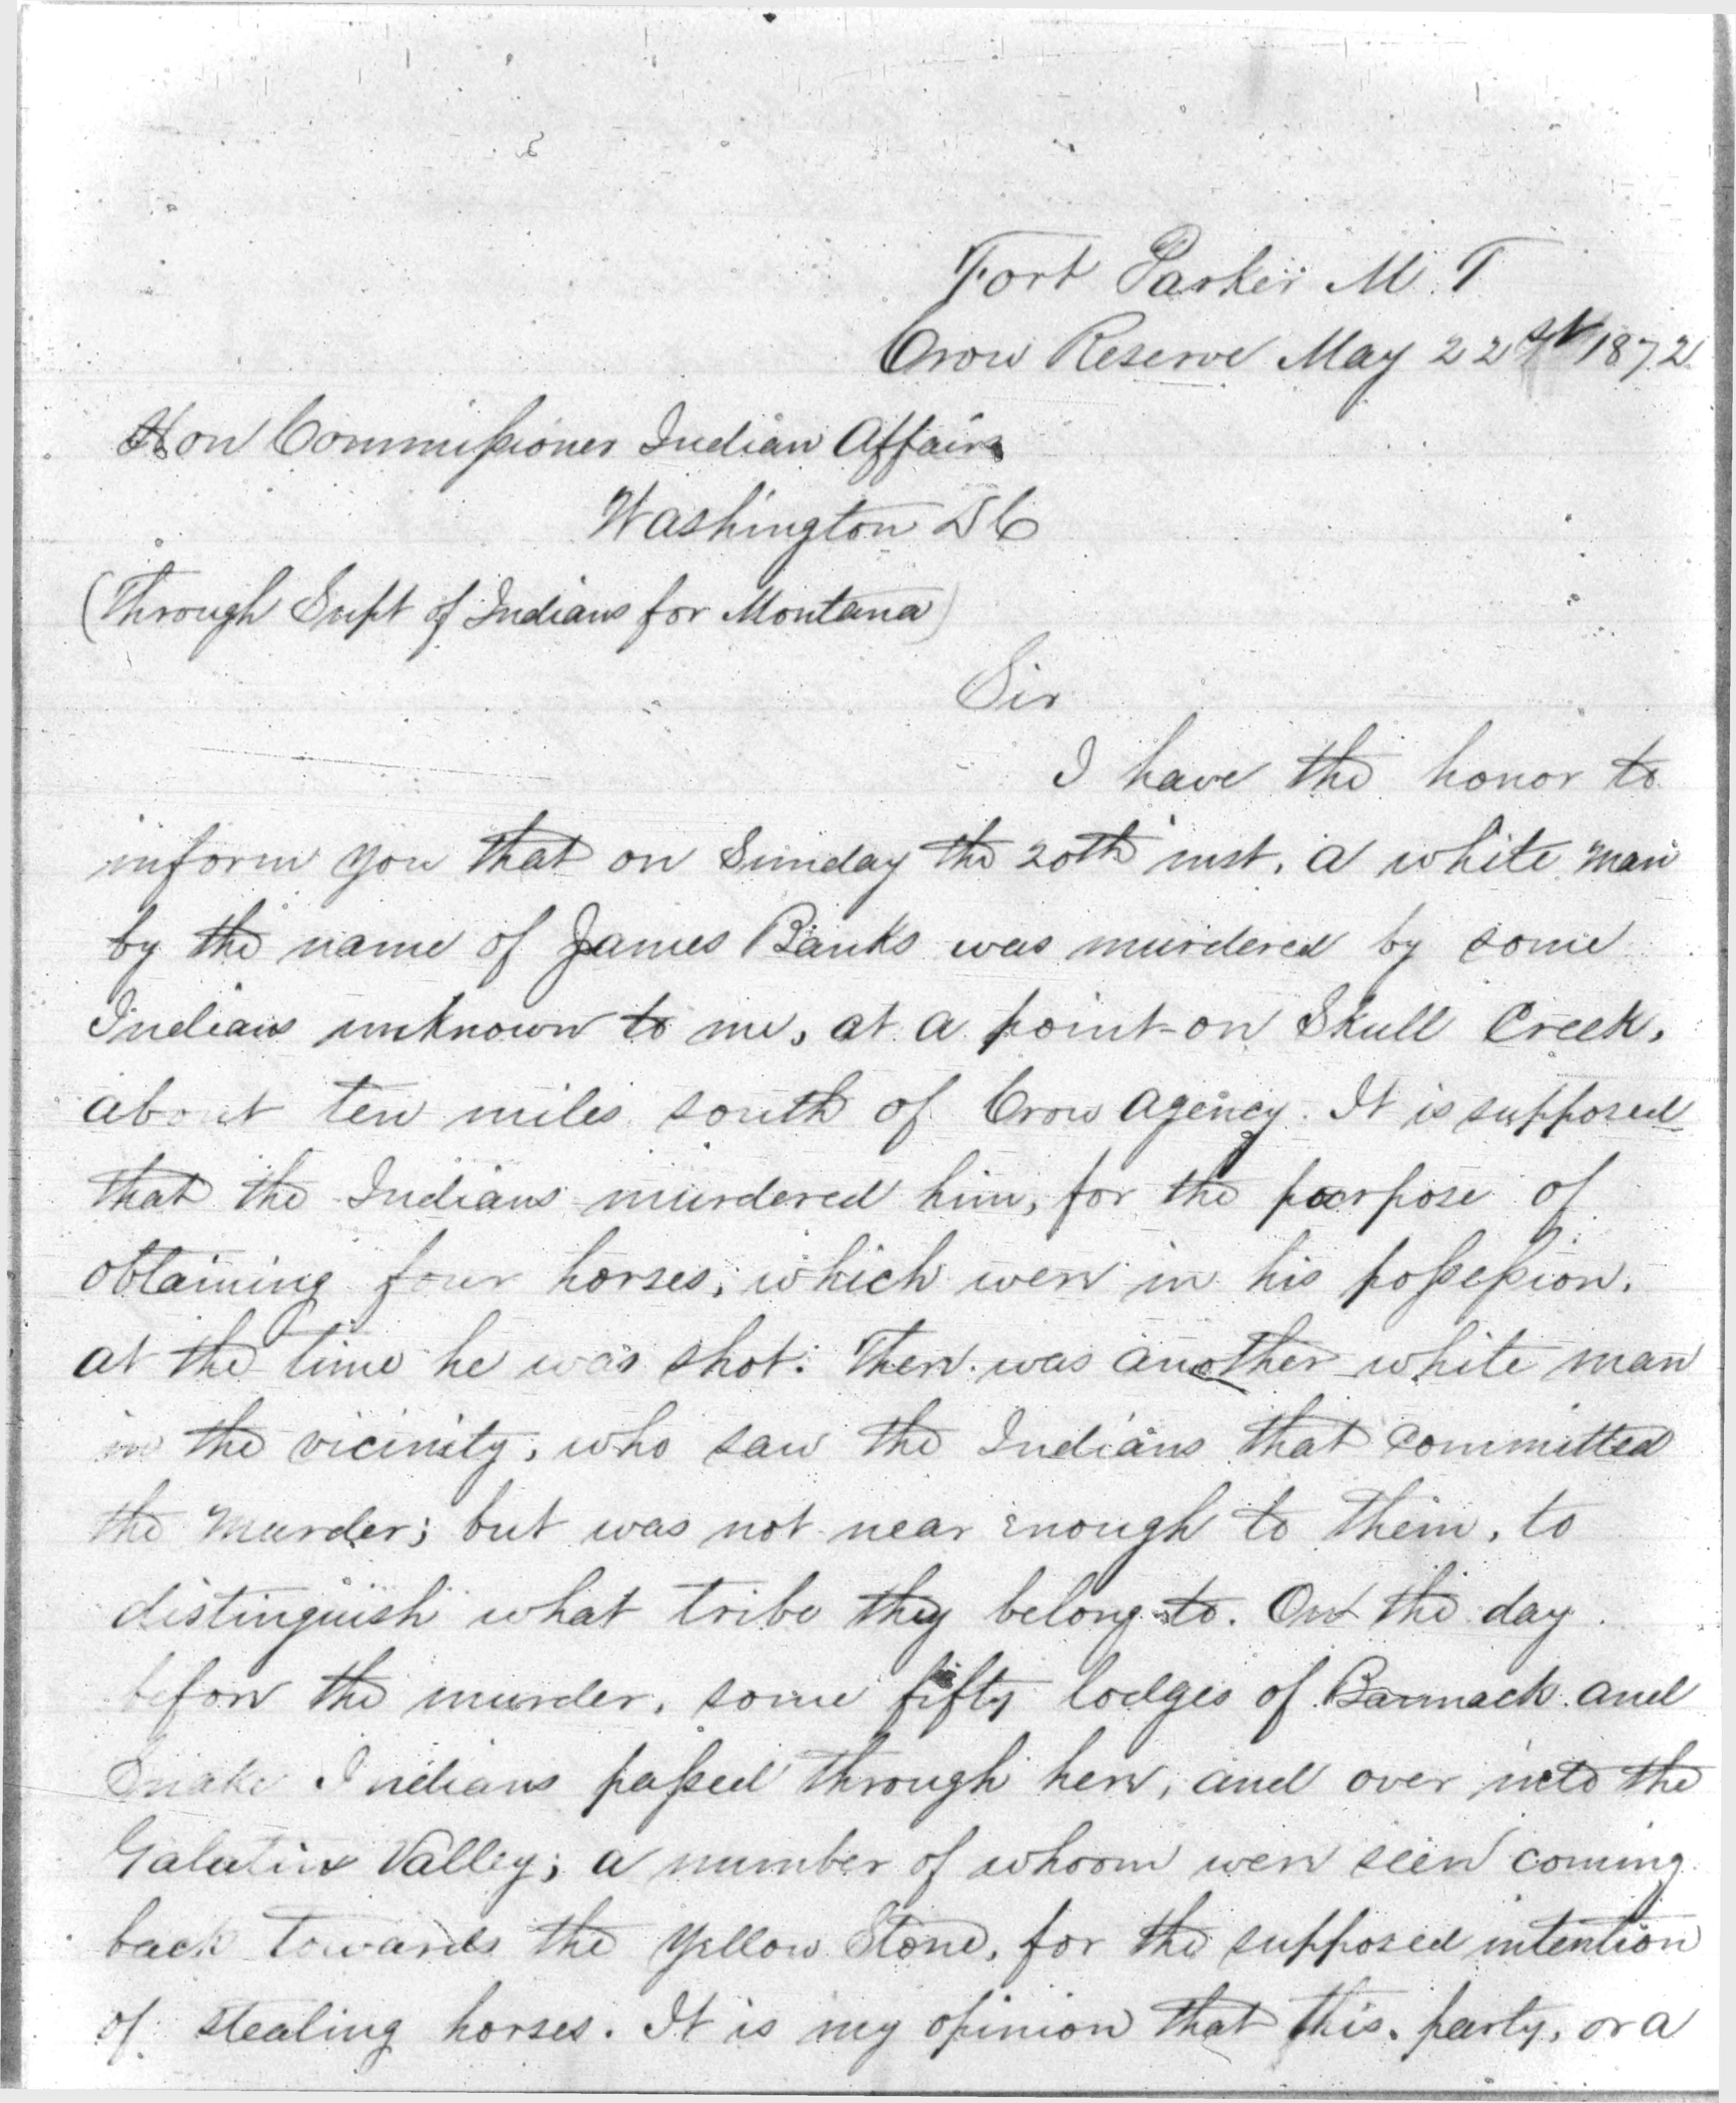 Letter from Franklin H. Head to Probate Judge, April 28, 1866, p. 1-2.